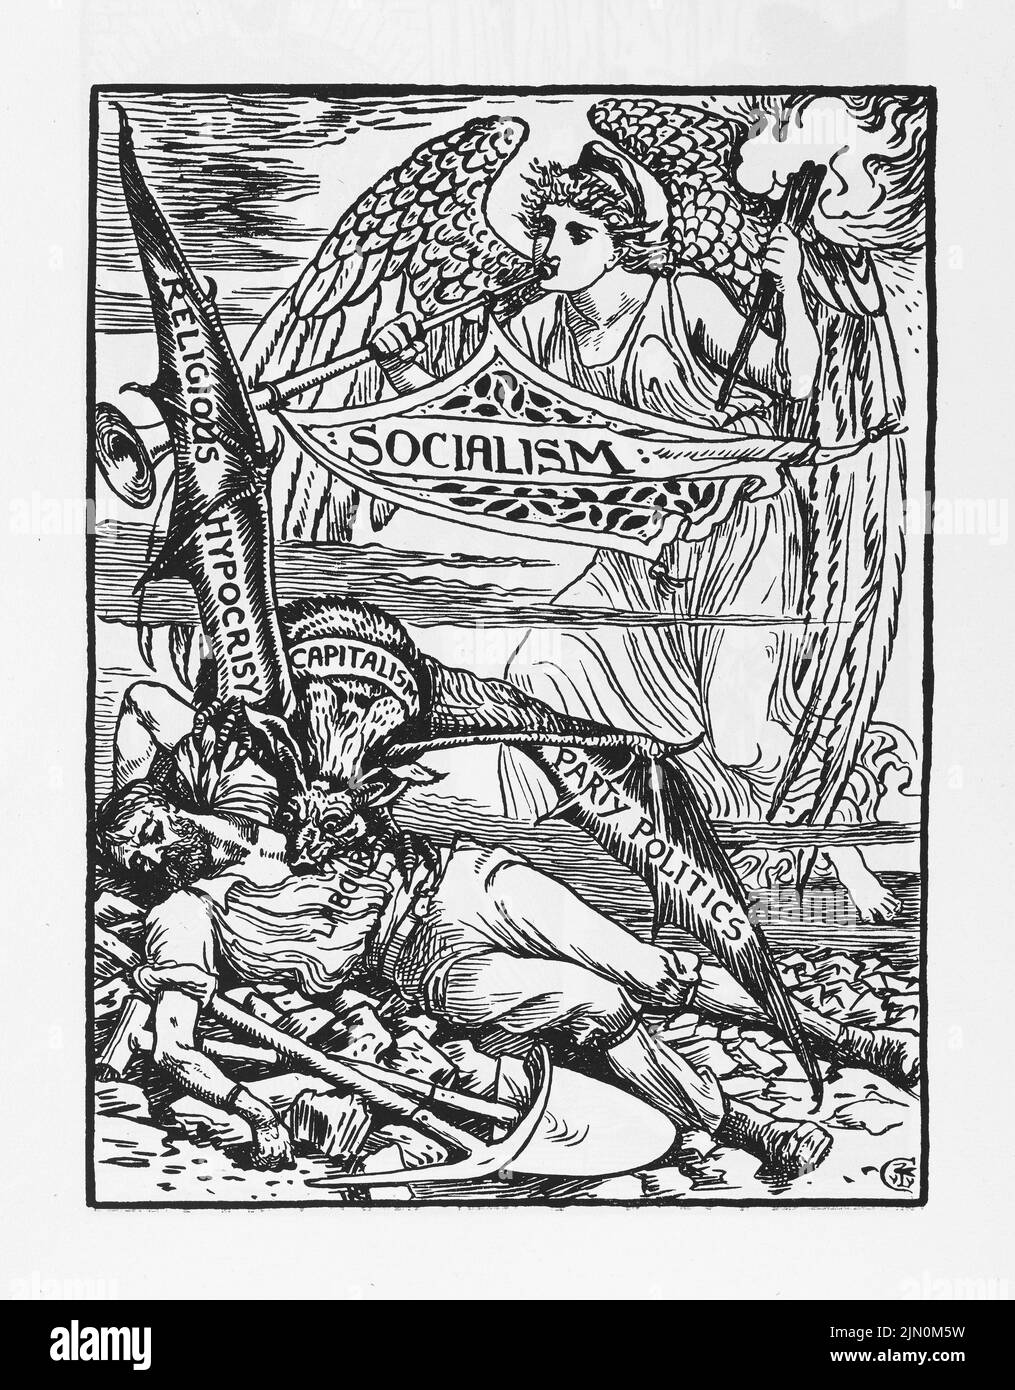 Socialism Illustration by Walter Crane from Cartoons for the Cause 1886-1896, International Socialist Workers. Stock Photo